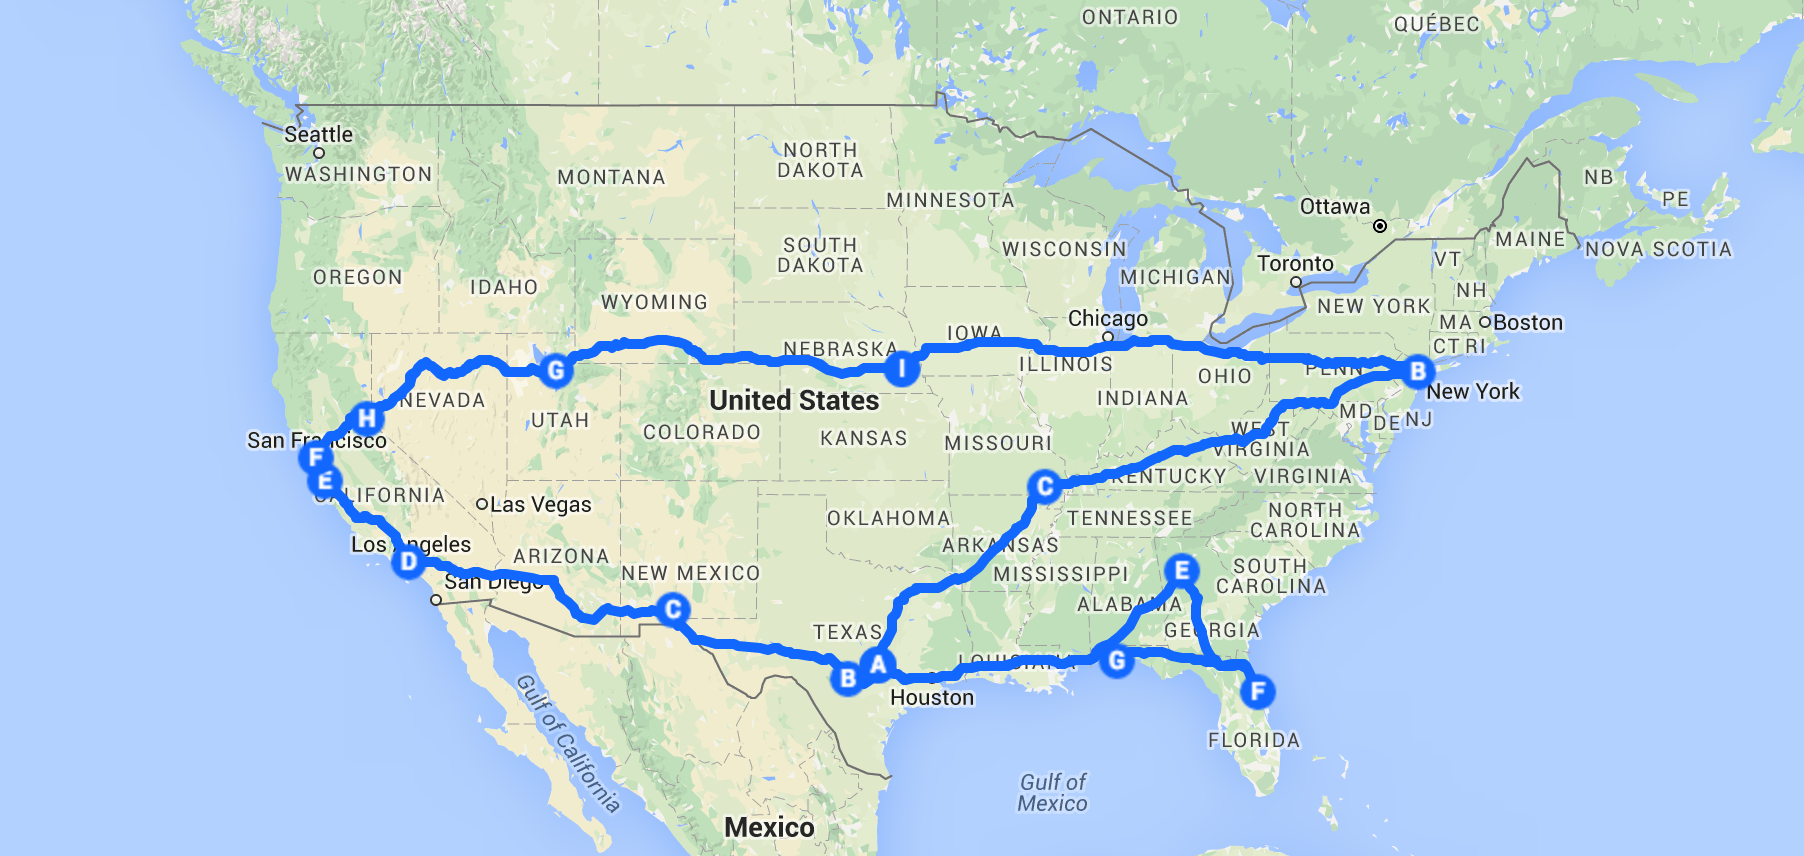 10 Photos from Driving 10,000 Miles Across the US in 3 Months